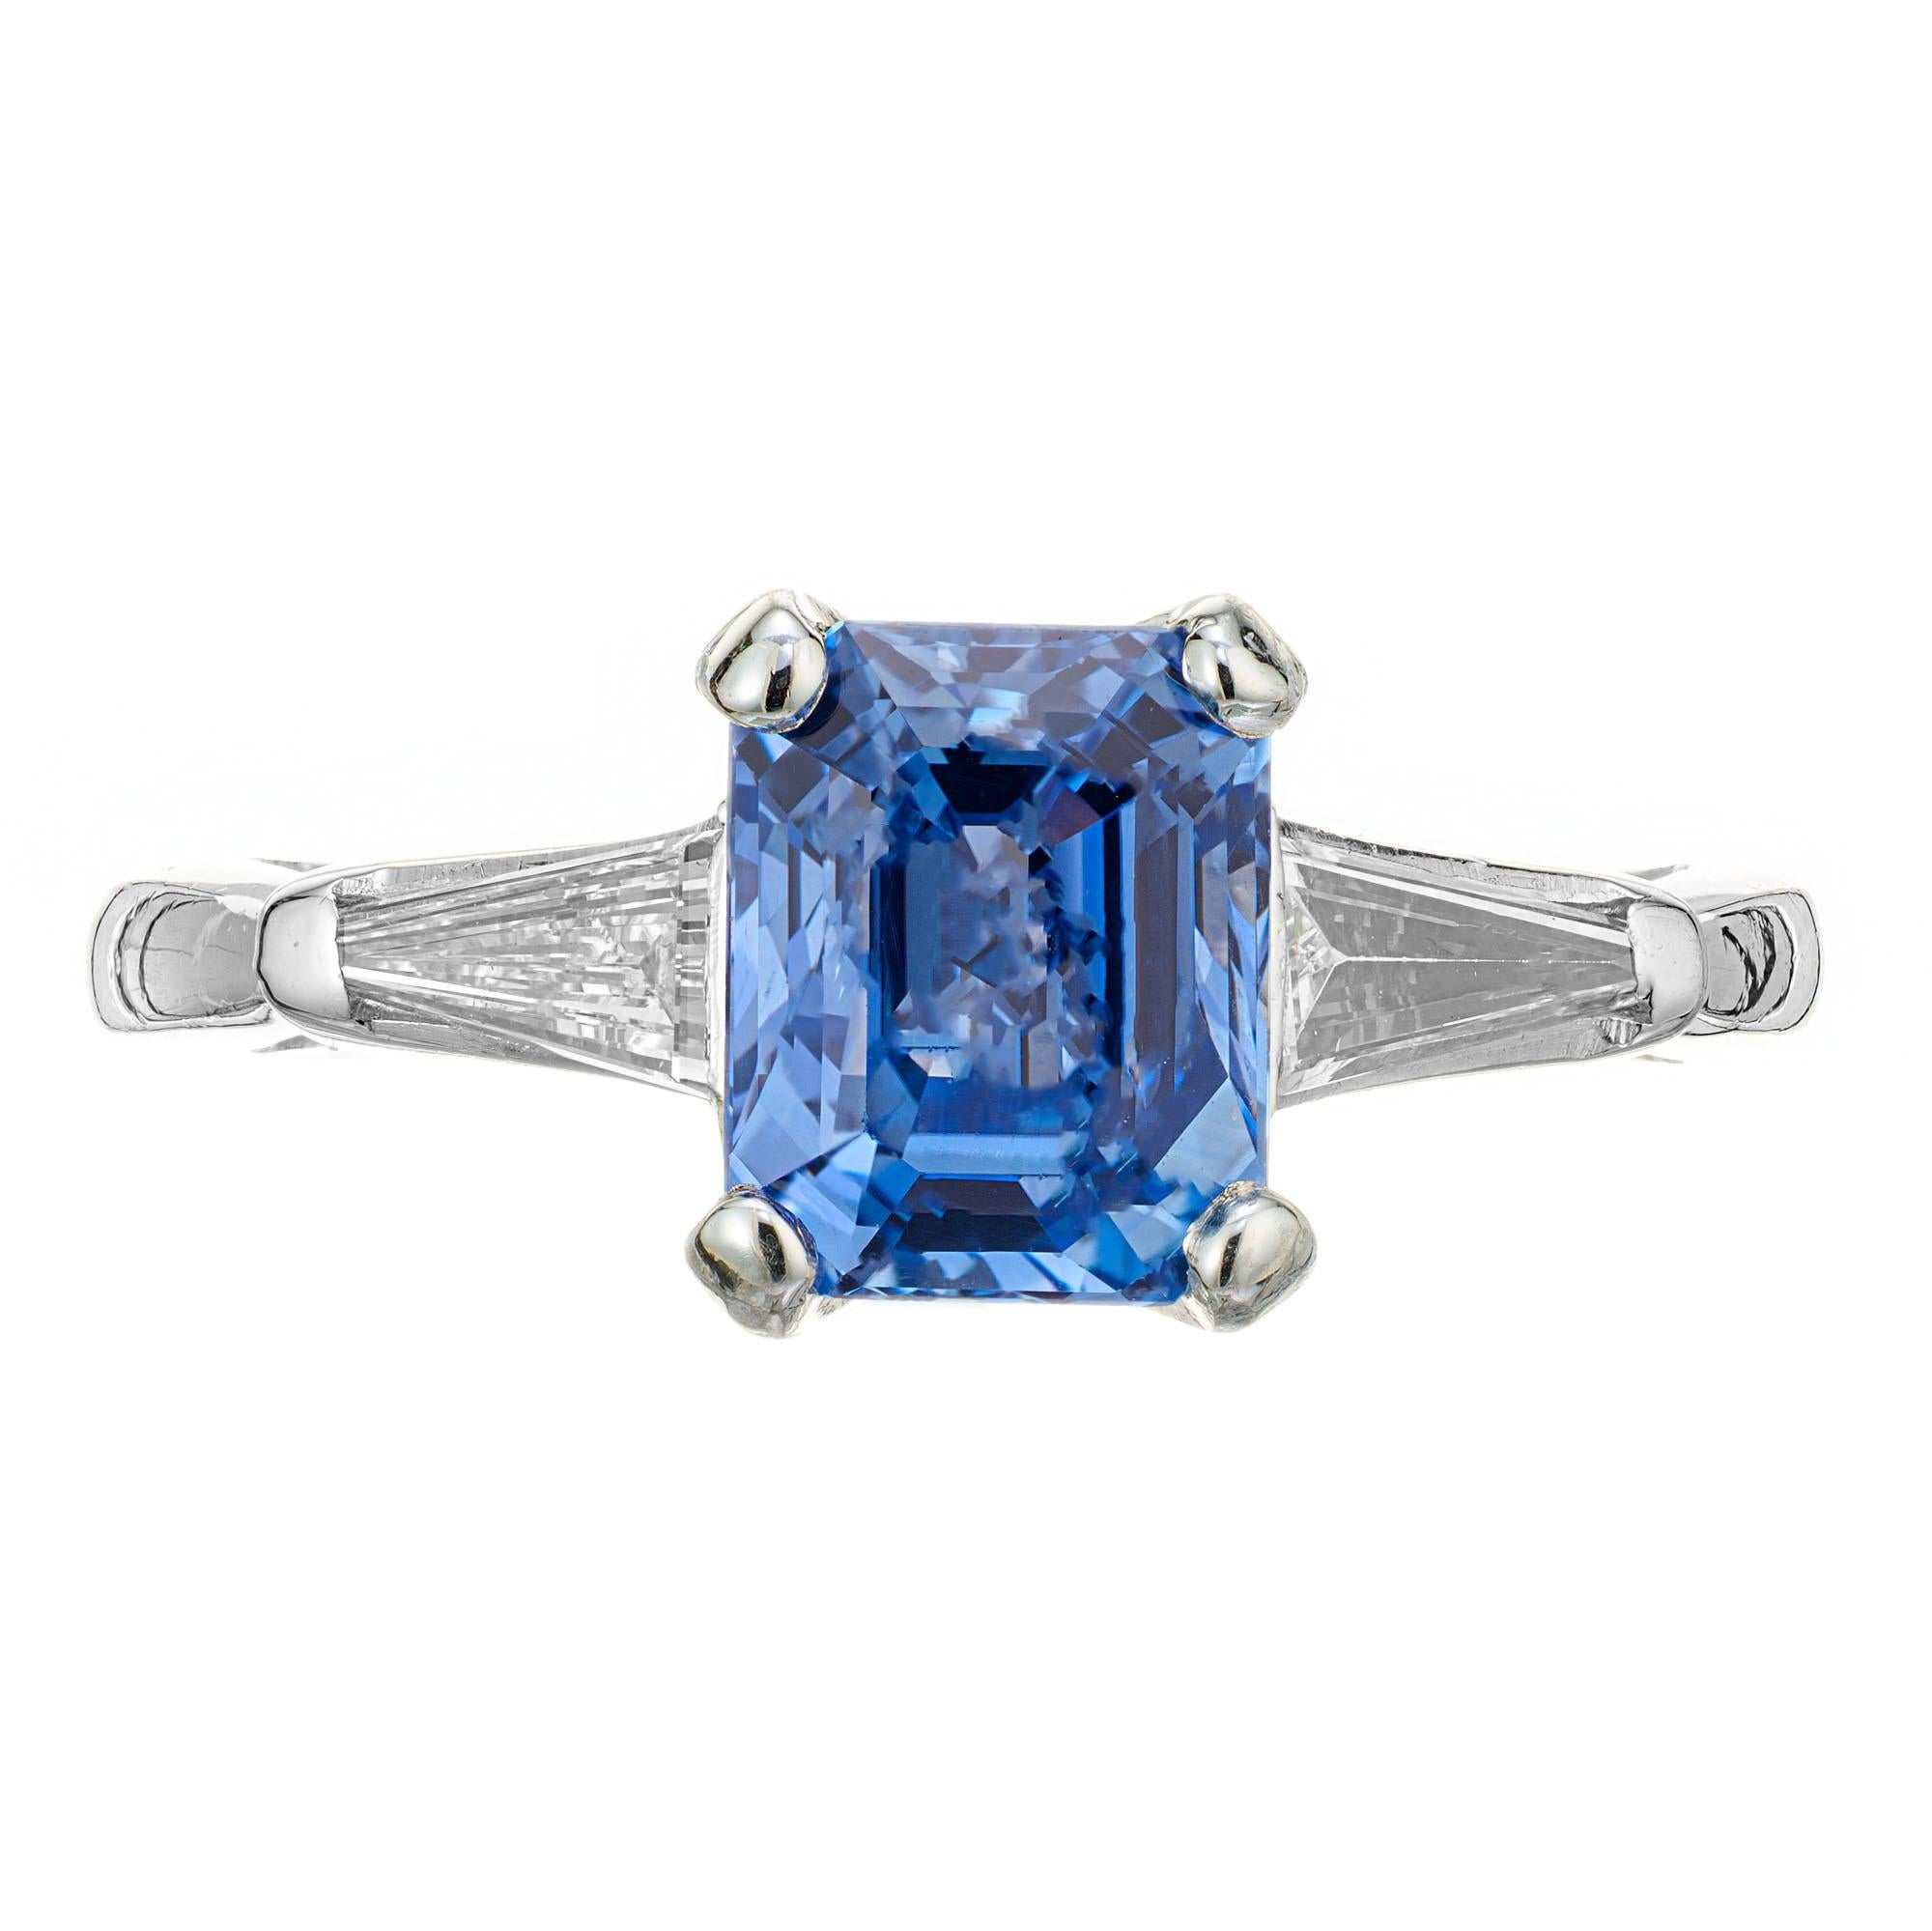 1940’s sapphire and diamond engagement ring. AGL certified center emerald cut Periwinkle sapphire in a platinum three stone setting with two tapered baguette side stones. Simple heat only. 

1 Emerald cut Periwinkle blue Sapphire, approx. total